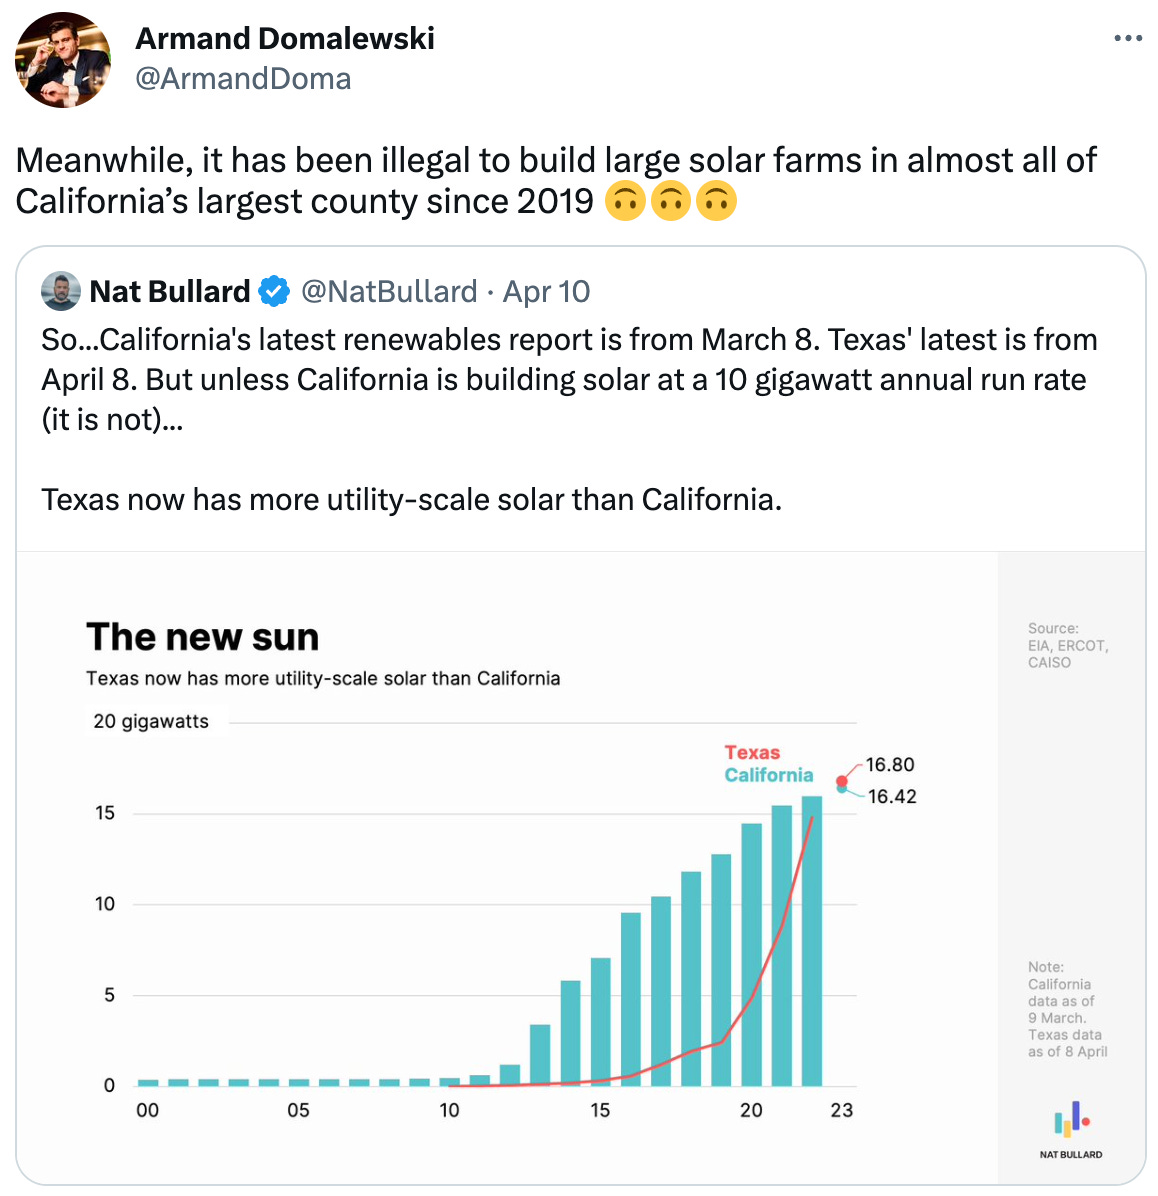  See new Tweets Conversation Armand Domalewski @ArmandDoma Meanwhile, it has been illegal to build large solar farms in almost all of California’s largest county since 2019 🙃🙃🙃 Quote Tweet Nat Bullard @NatBullard · Apr 10 So...California's latest renewables report is from March 8. Texas' latest is from April 8. But unless California is building solar at a 10 gigawatt annual run rate (it is not)...  Texas now has more utility-scale solar than California.